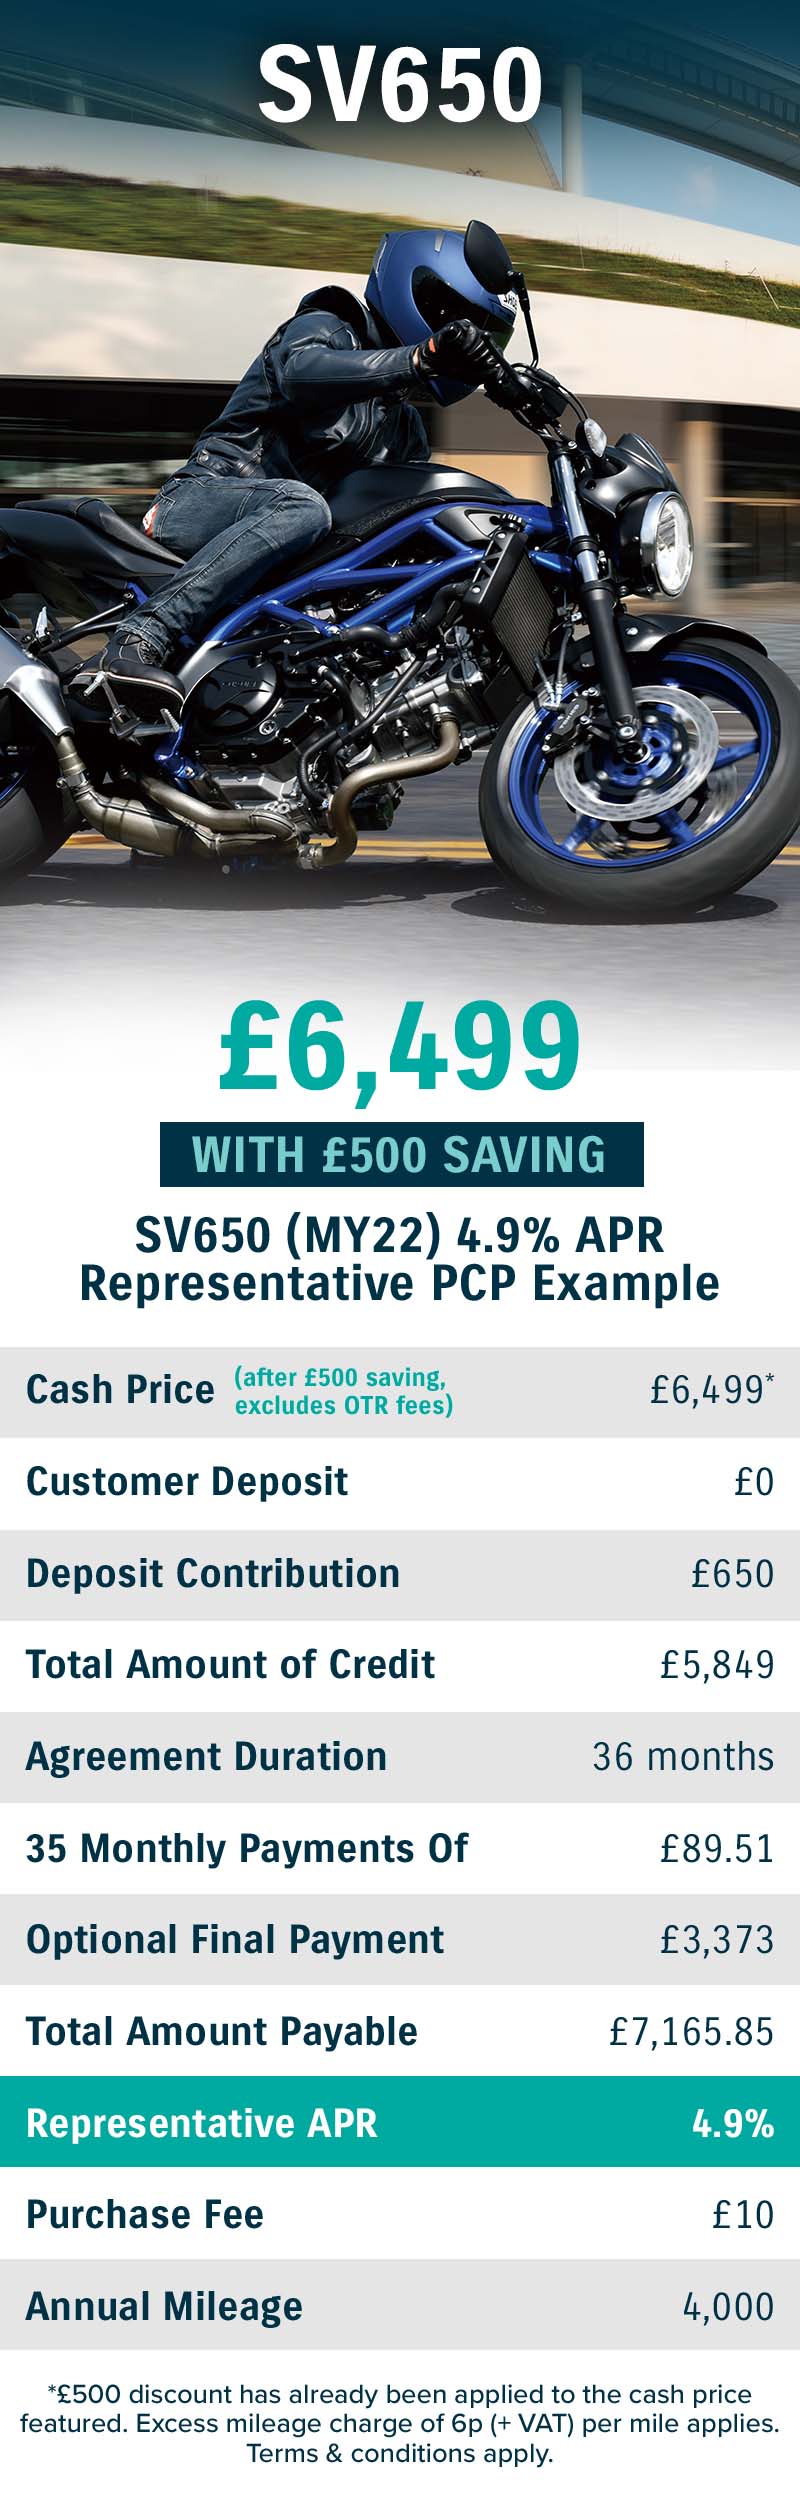 Enjoy a £650 test ride contribution with the Suzuki SV650 at Laguna Motorcycles in Maidstone